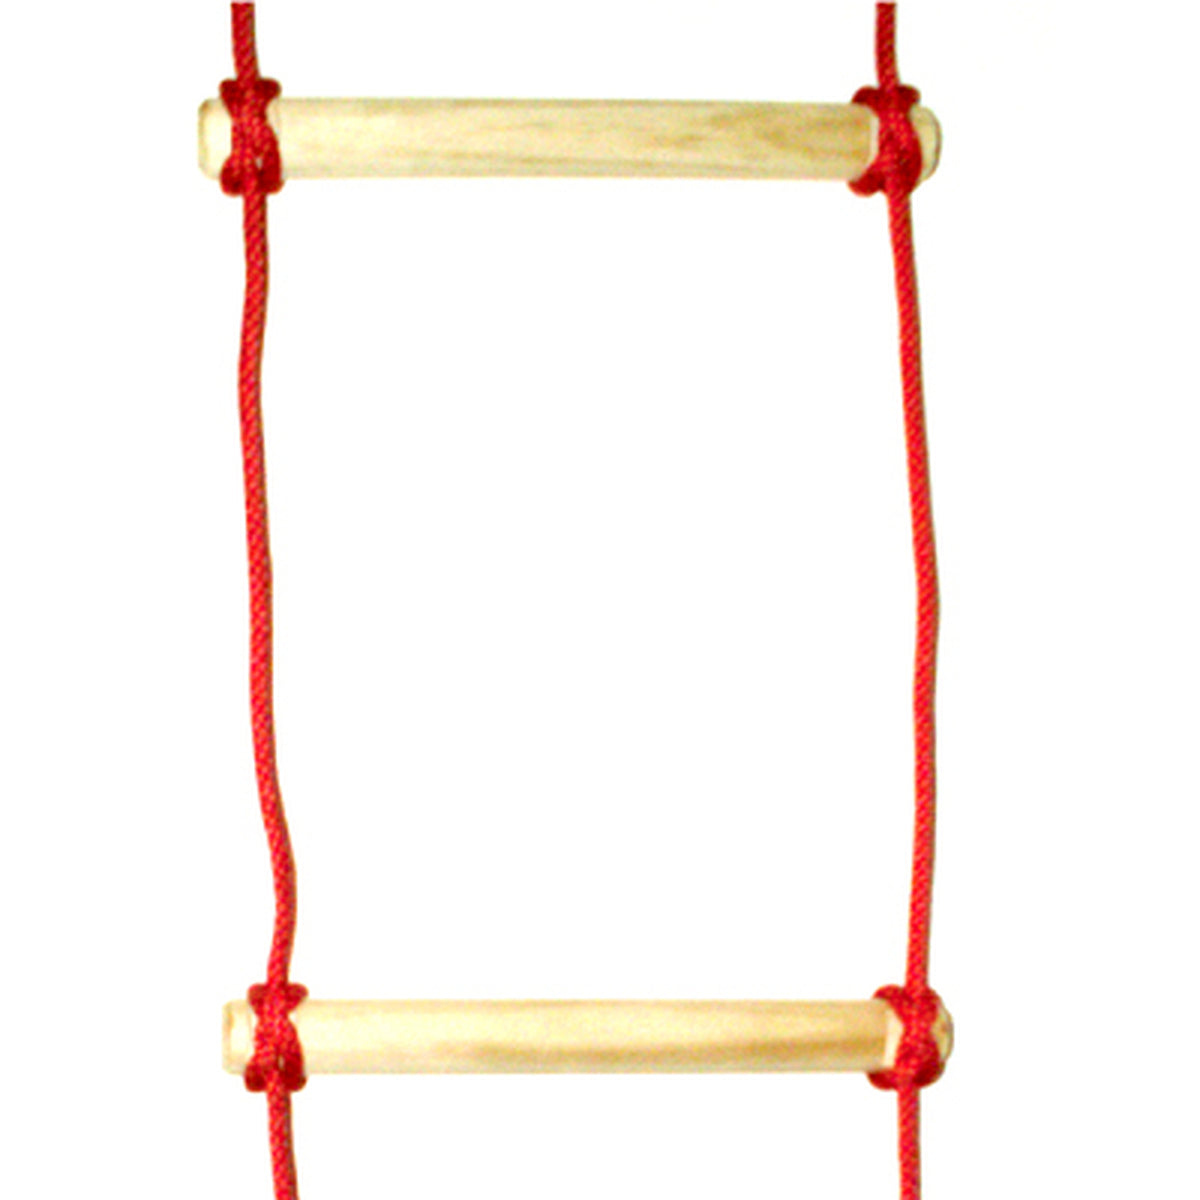 Rope and rope ladder online shop